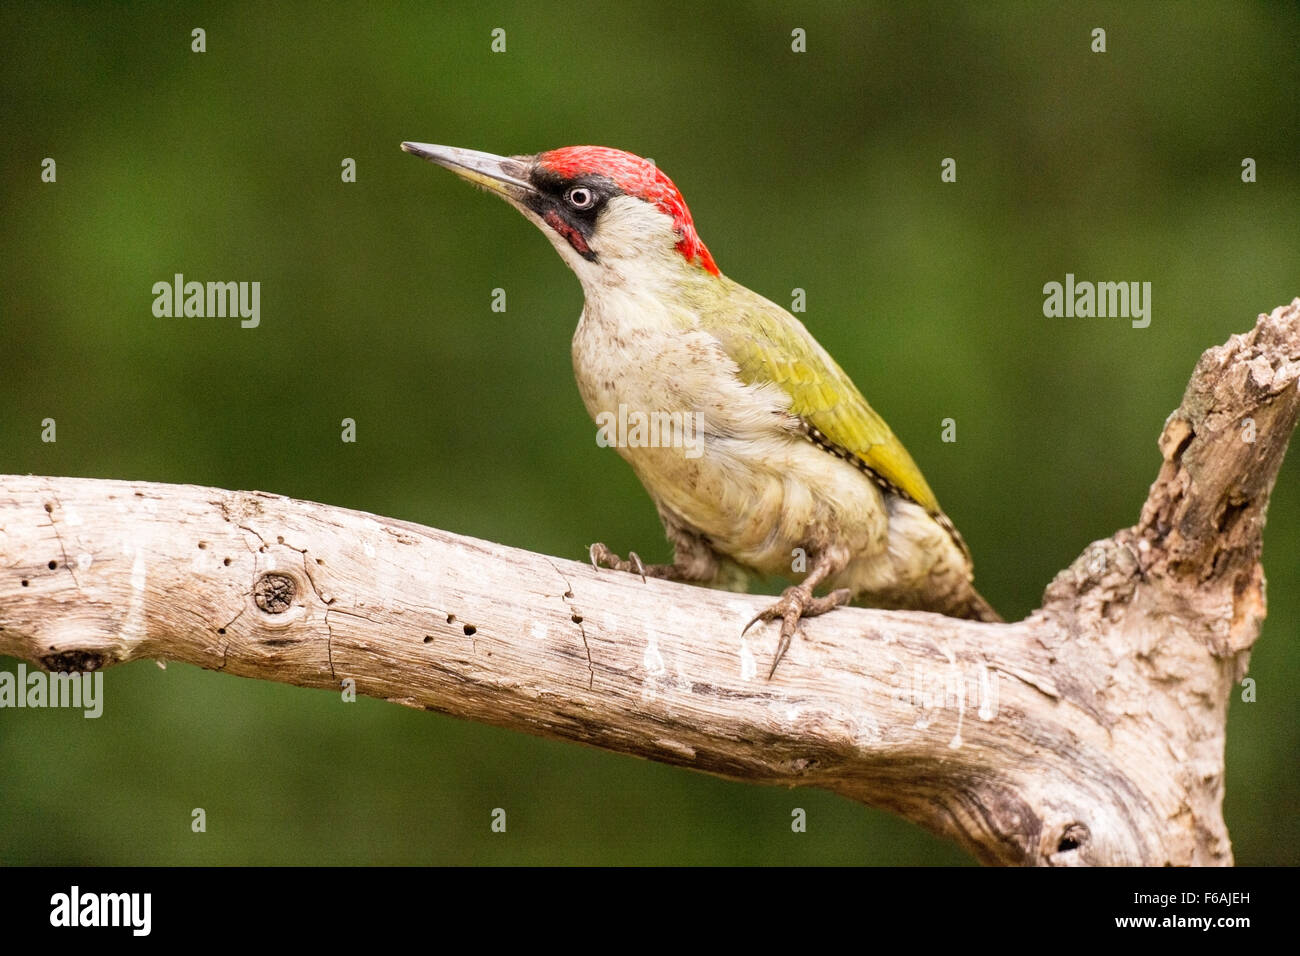 Green woodpecker (Picus viridis) adult perched on branch in woodland, Hungary, Europe Stock Photo